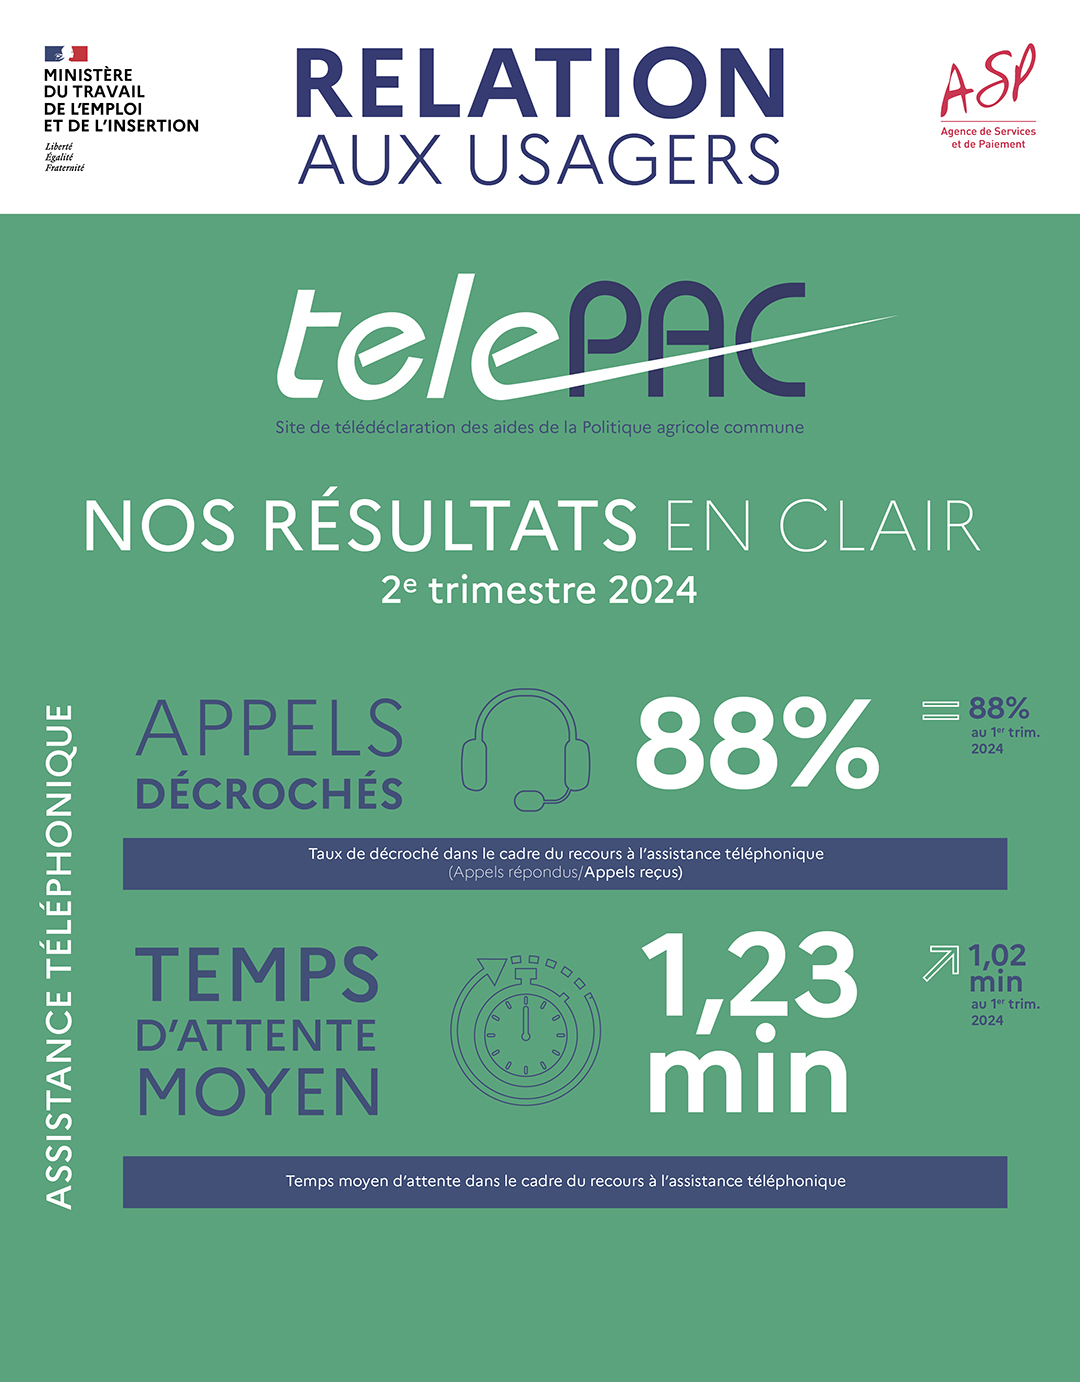 Relation aux usagers - Telepac